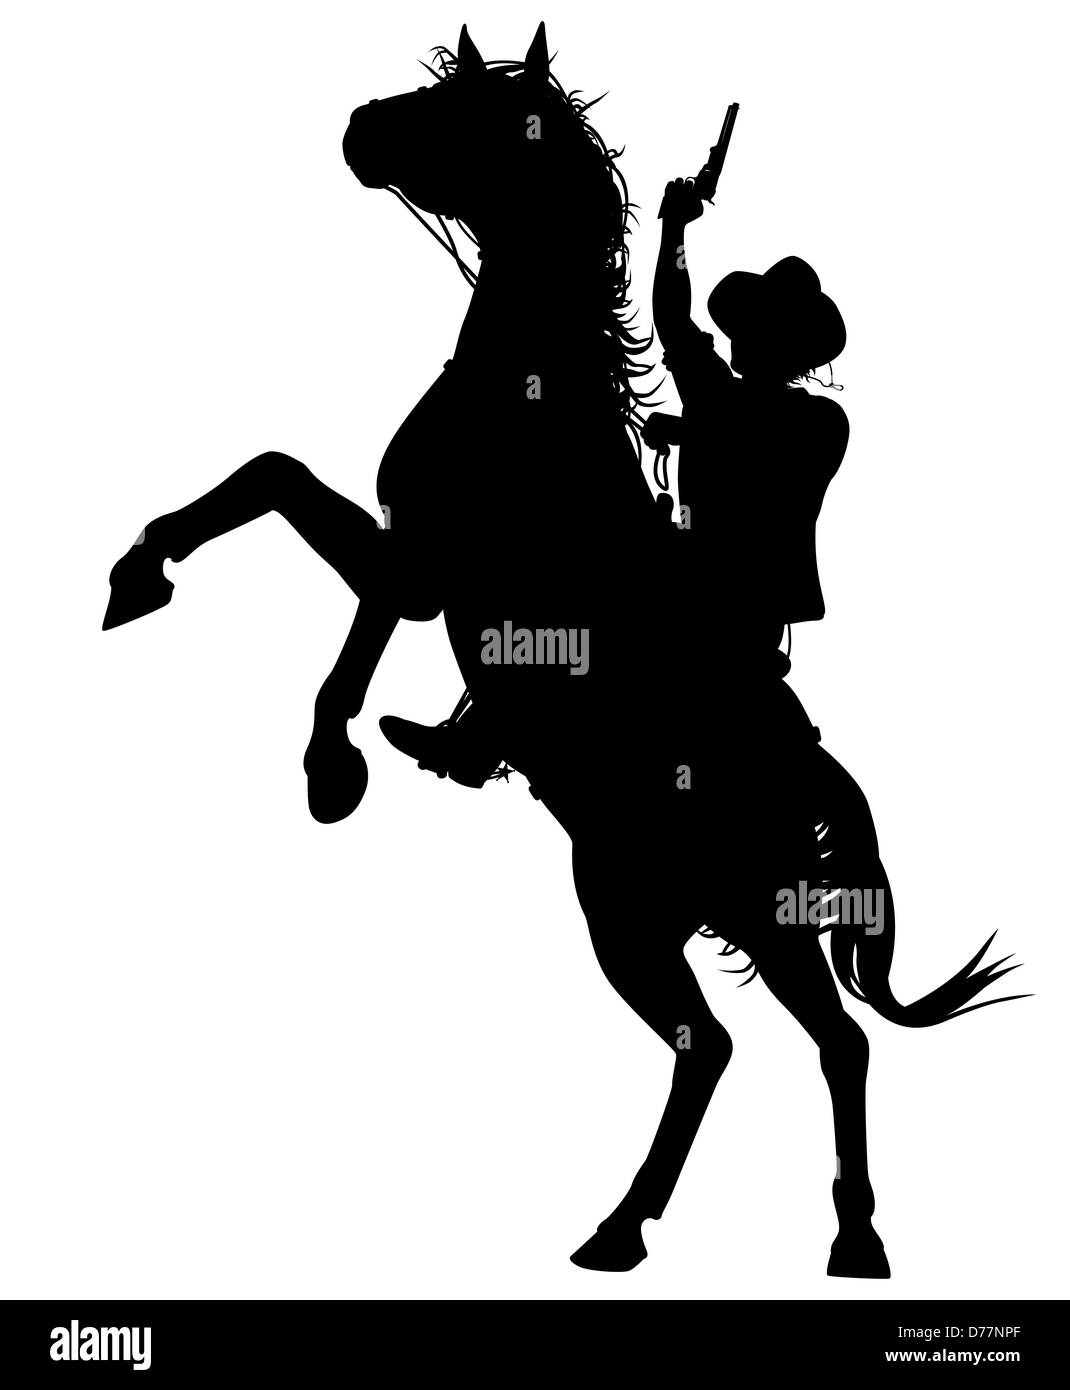 Illustrated silhouette of a cowboy shooting a pistol on a rearing horse Stock Photo